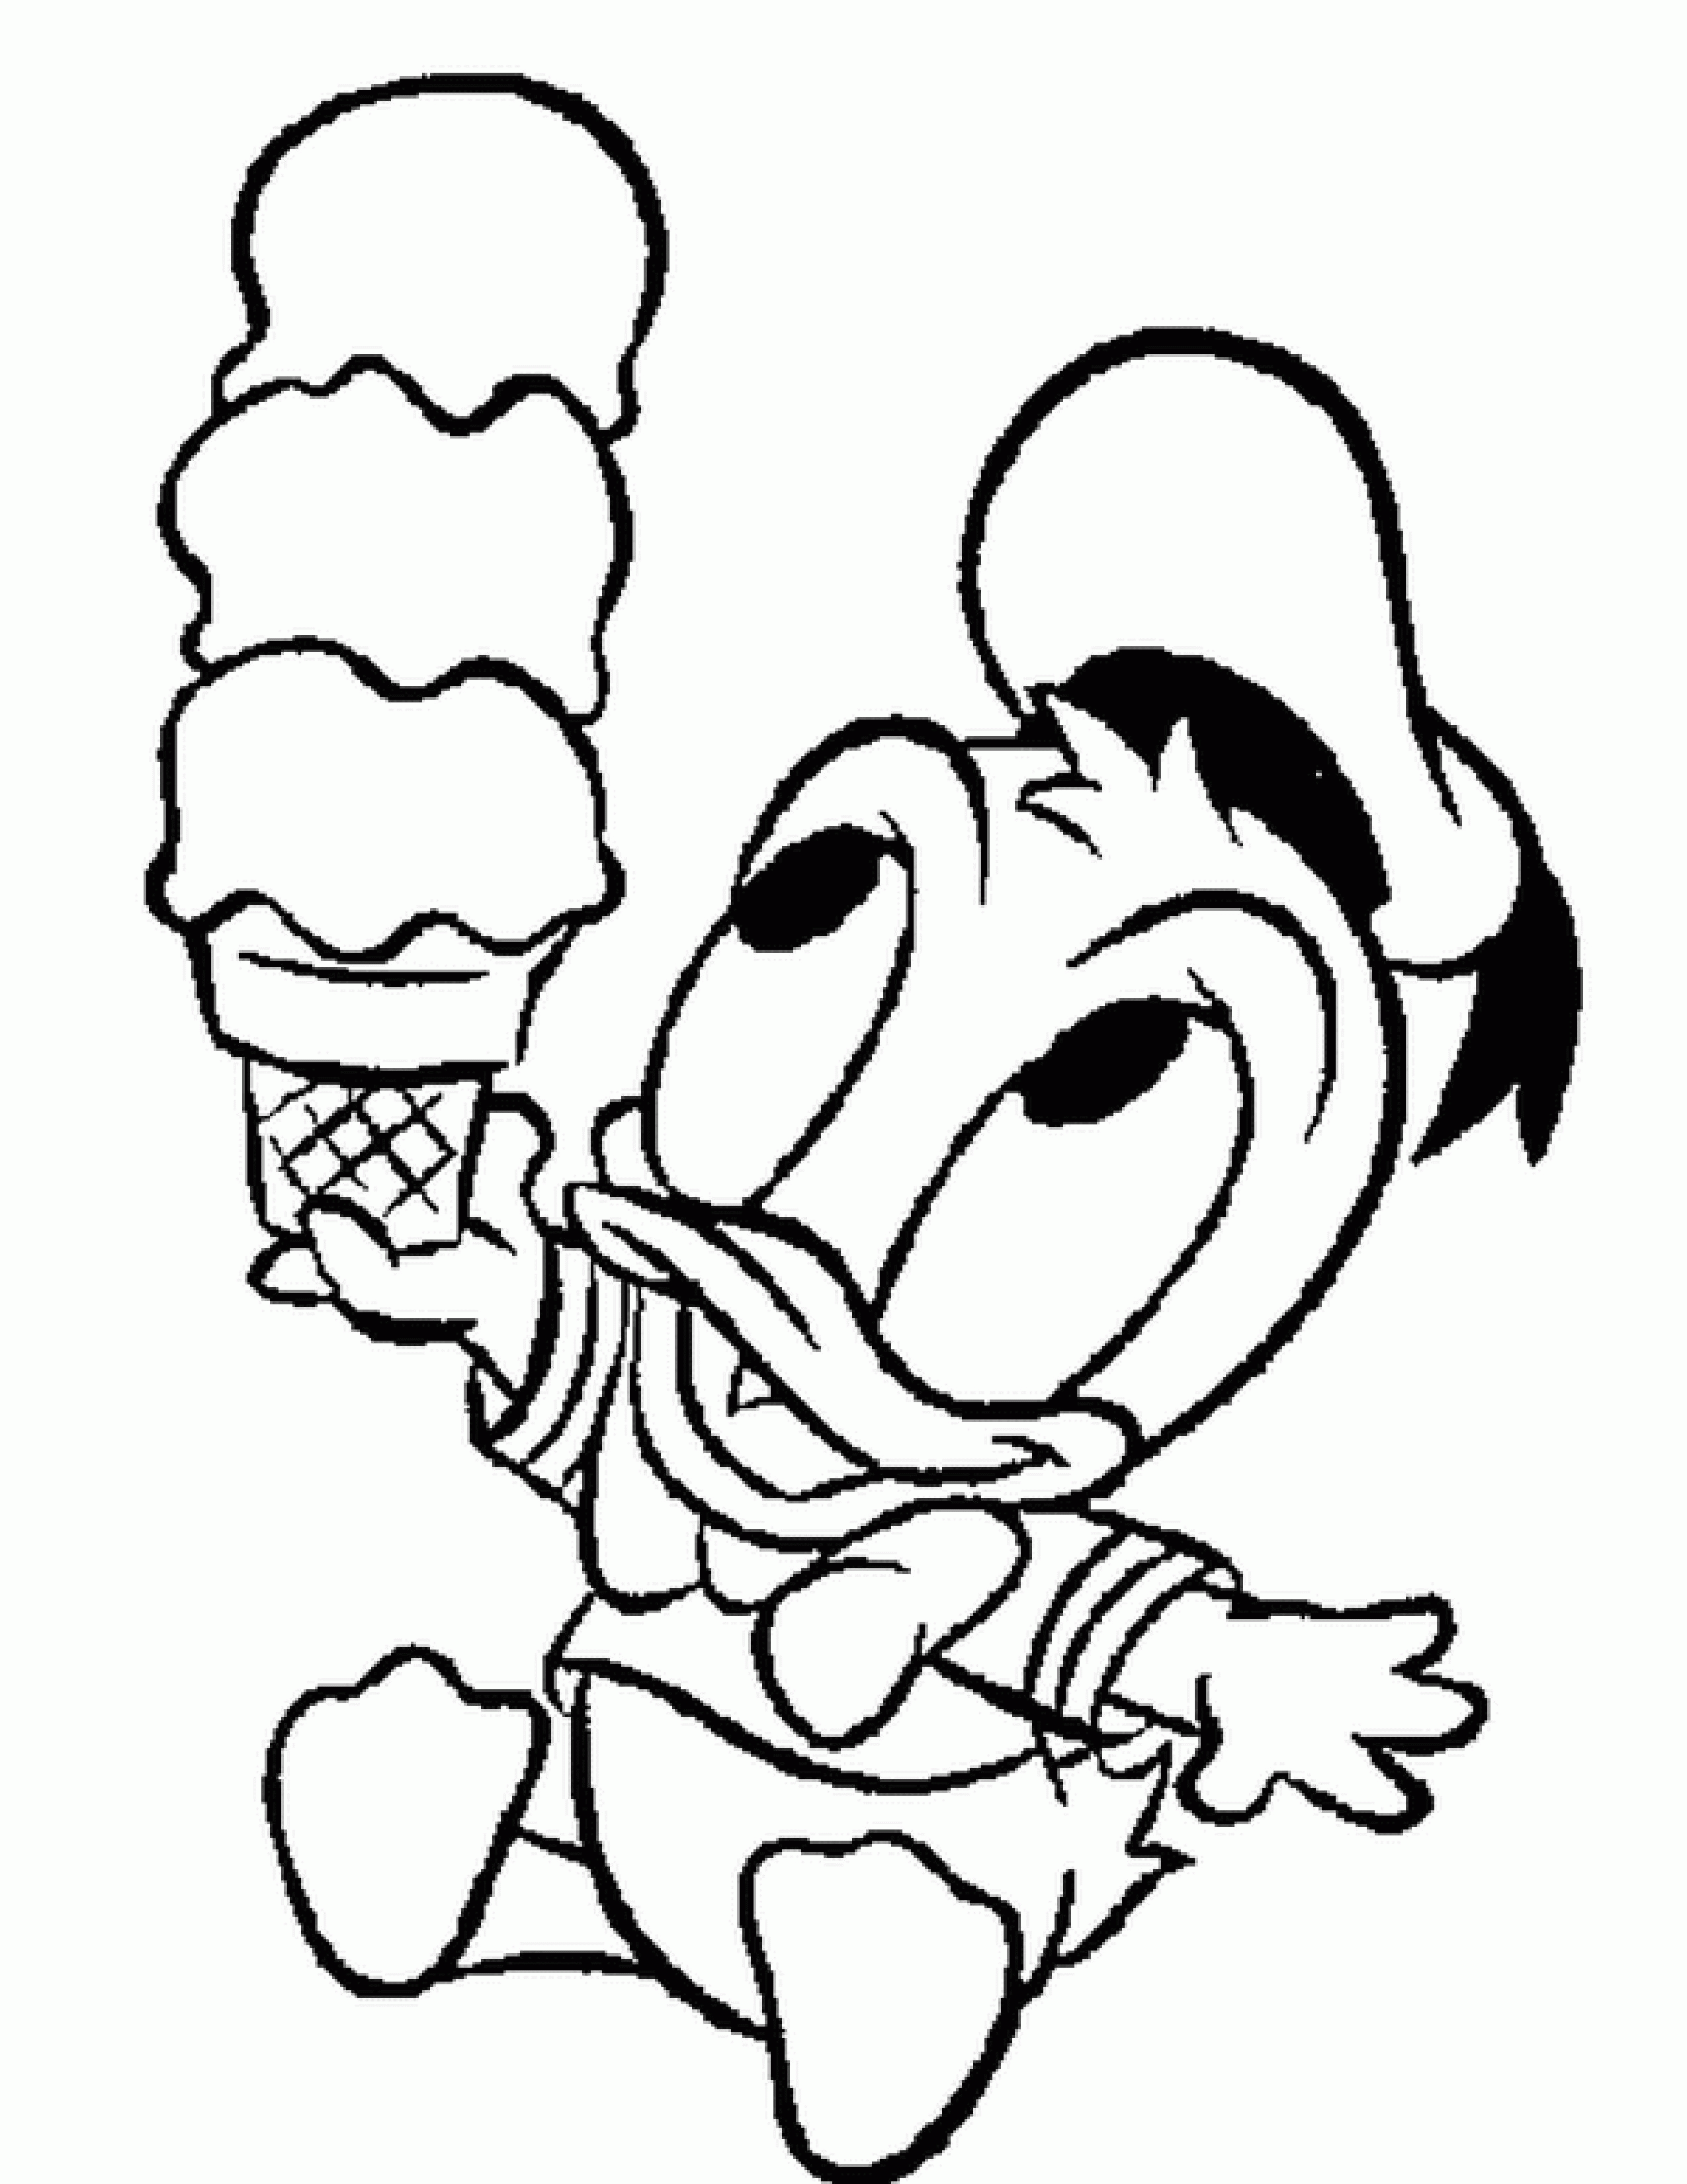 Disney Baby Characters Coloring Pages - Coloring Home